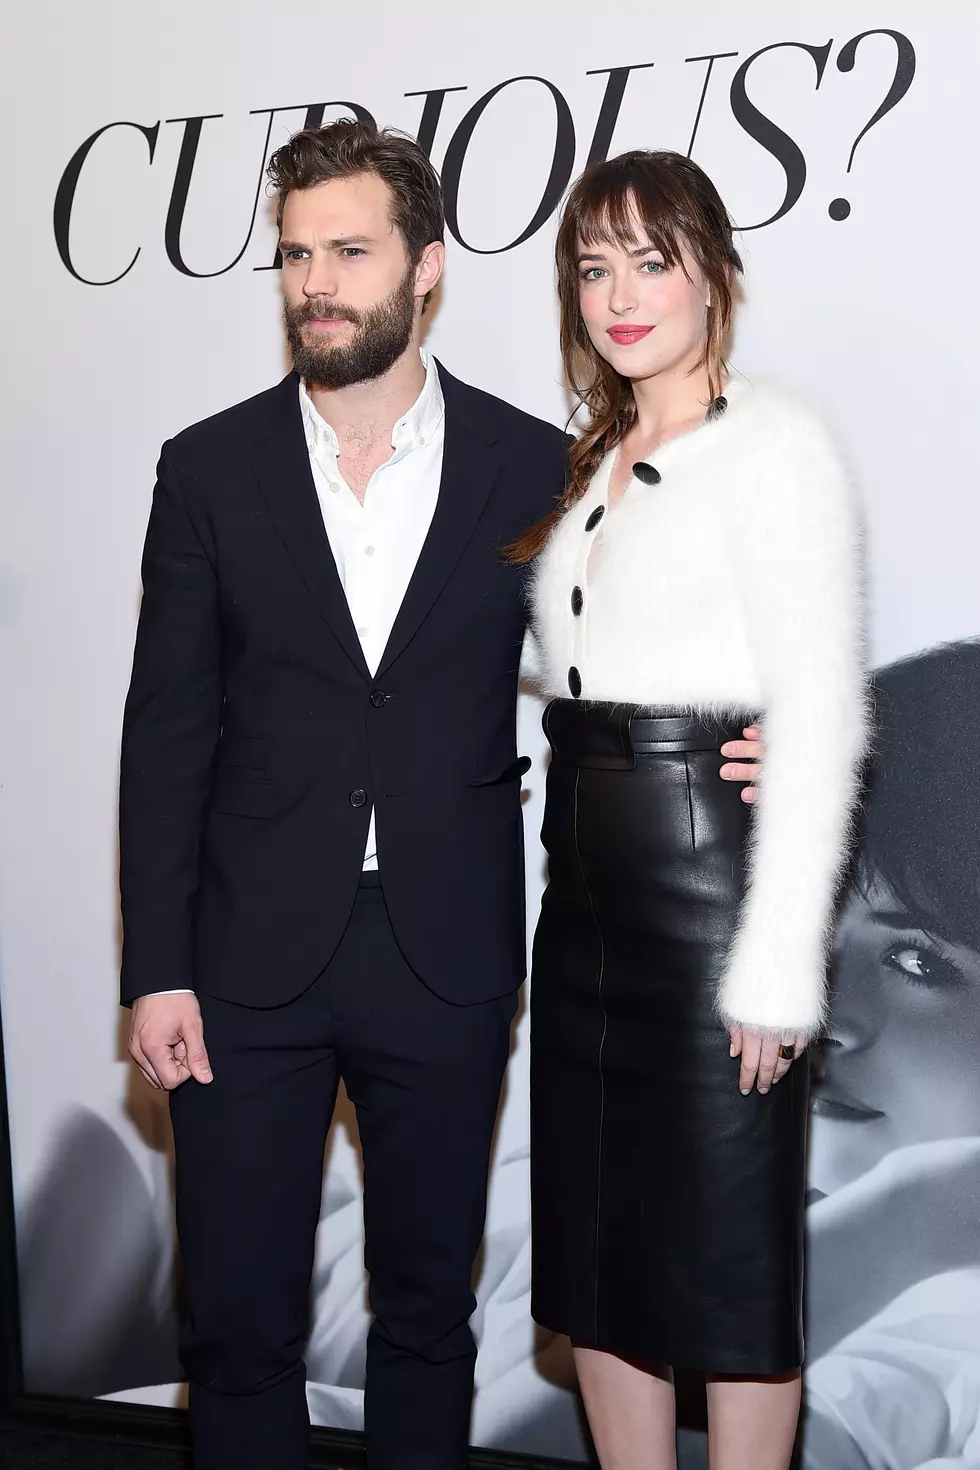 &#8216;Fifty Shades&#8217; Count Down Begins!